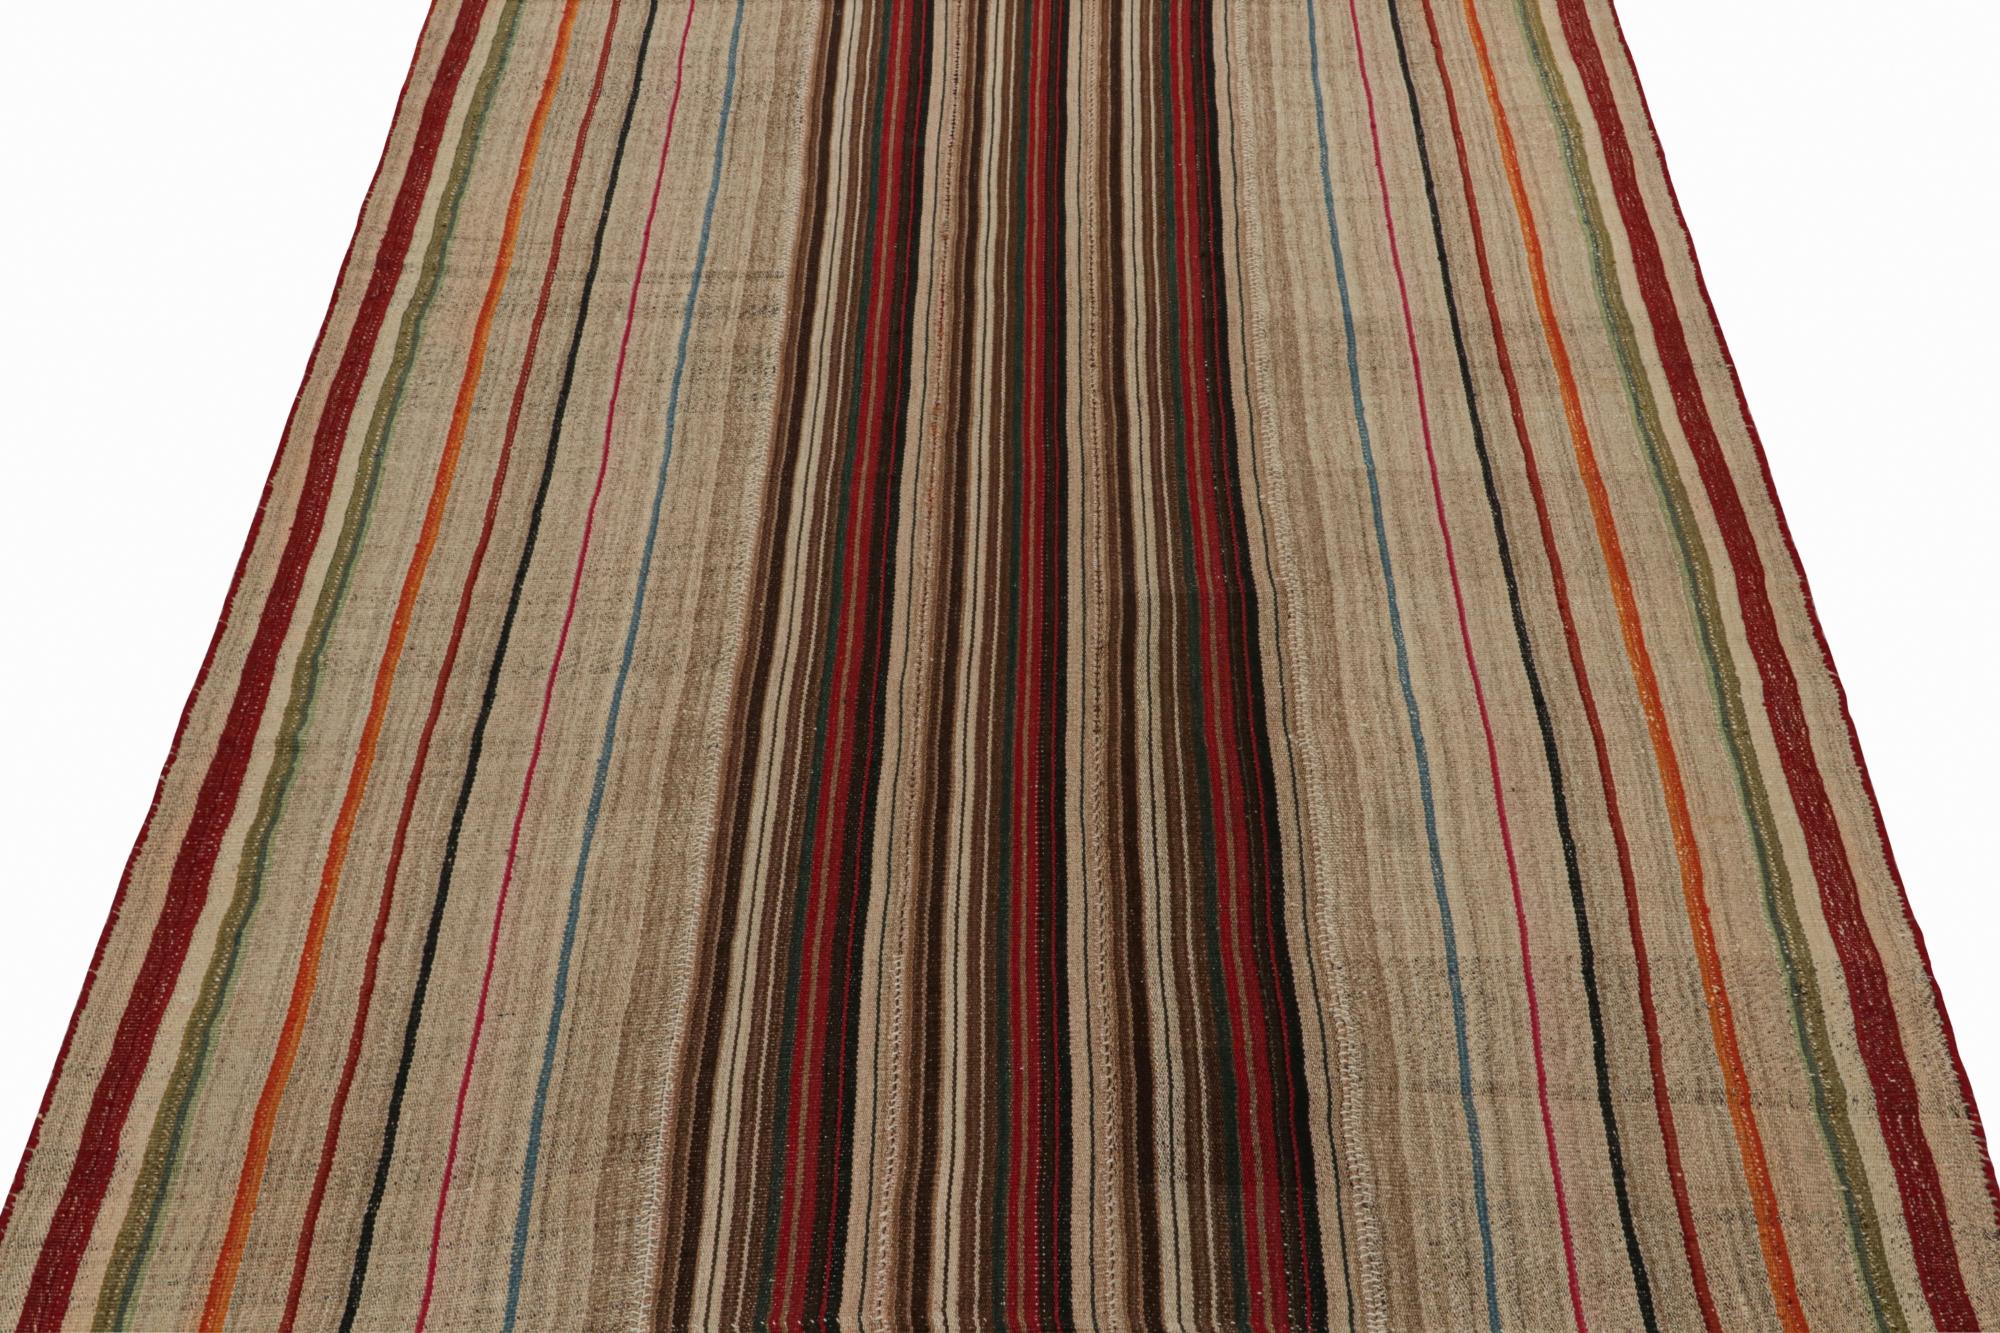 This vintage 7x9 Persian Kilim is handwoven in wool, and originates circa 1950-1960.

On the Design: 

This flatweave carries striped patterns relishing a play of vibrant tones with beige-brown in panel style. It’s a comfortable choice with vast